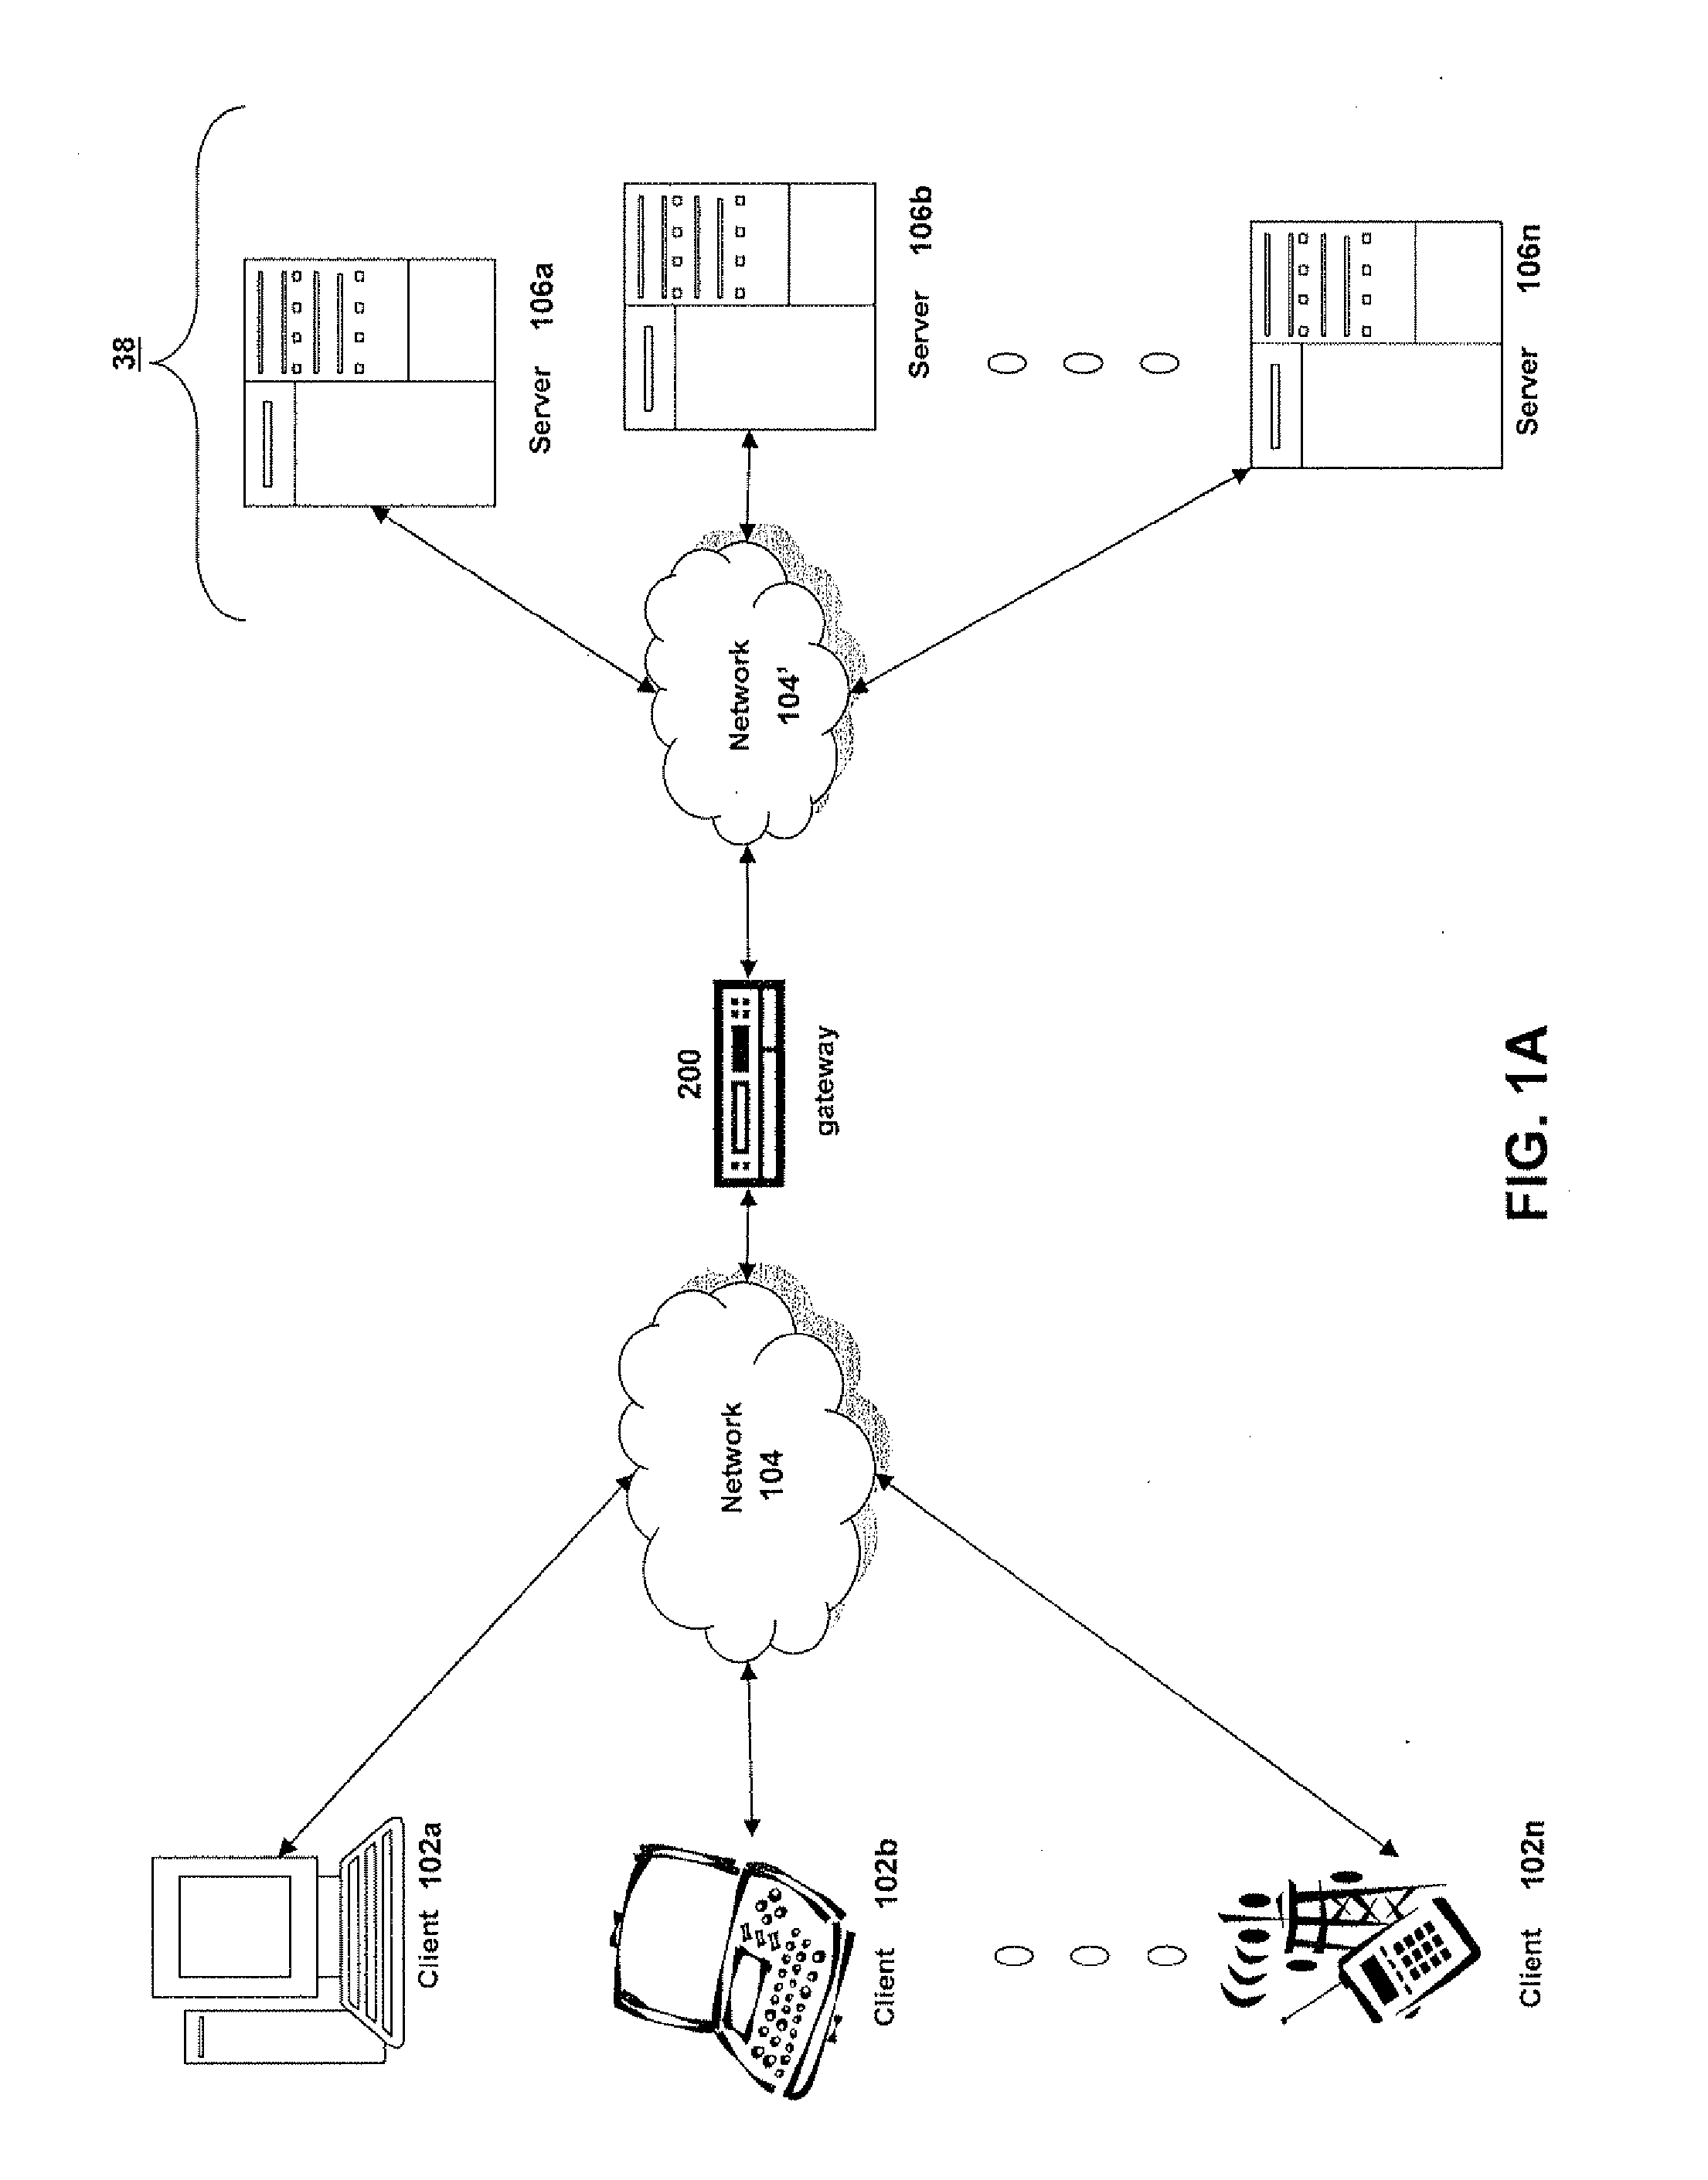 Systems and Methods for Isolating On-Screen Textual Data